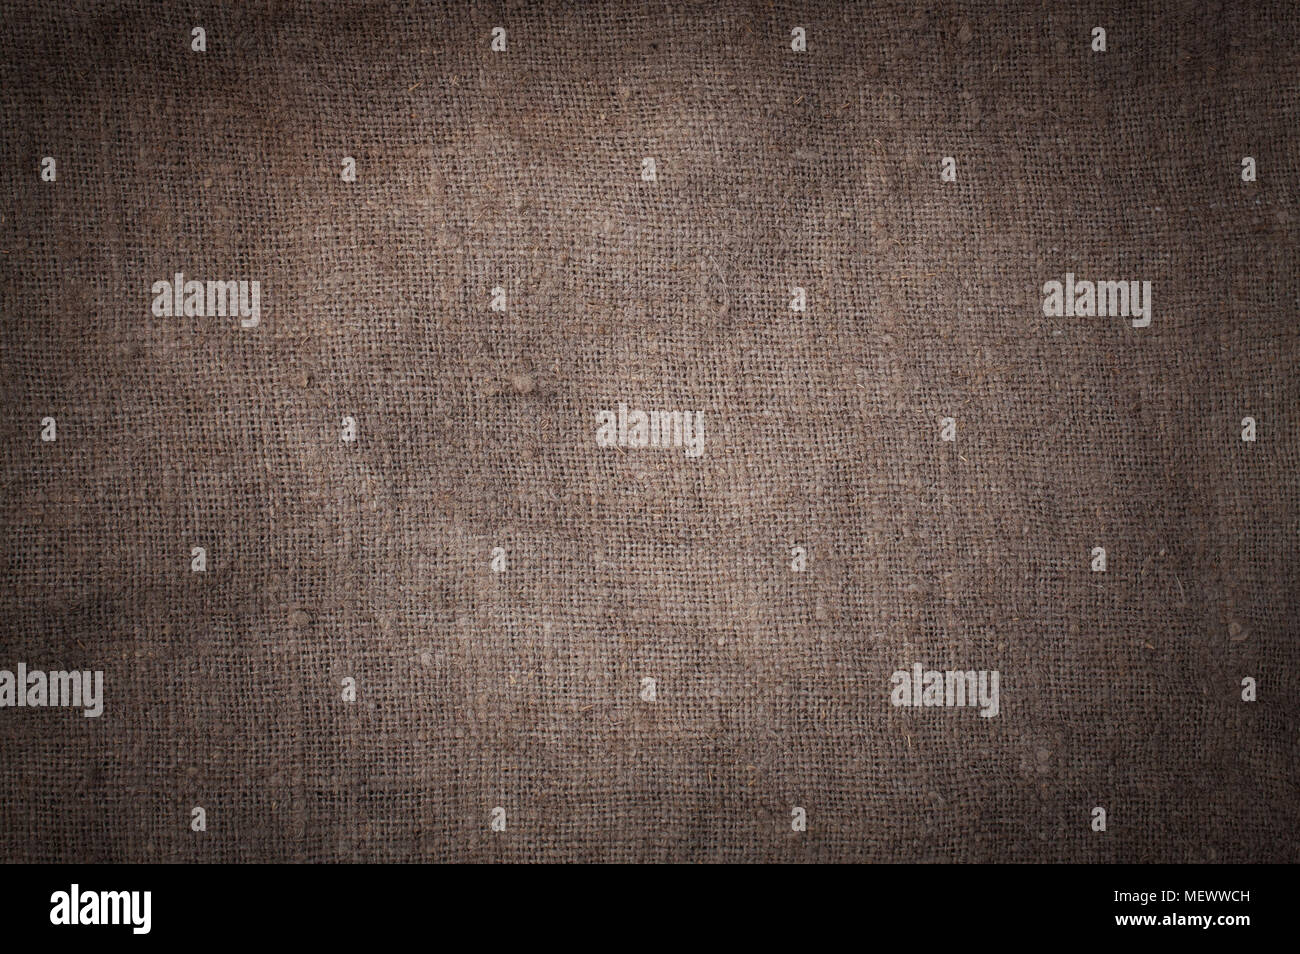 Old stained brown horizontal creasy burlap texture. Stock Photo